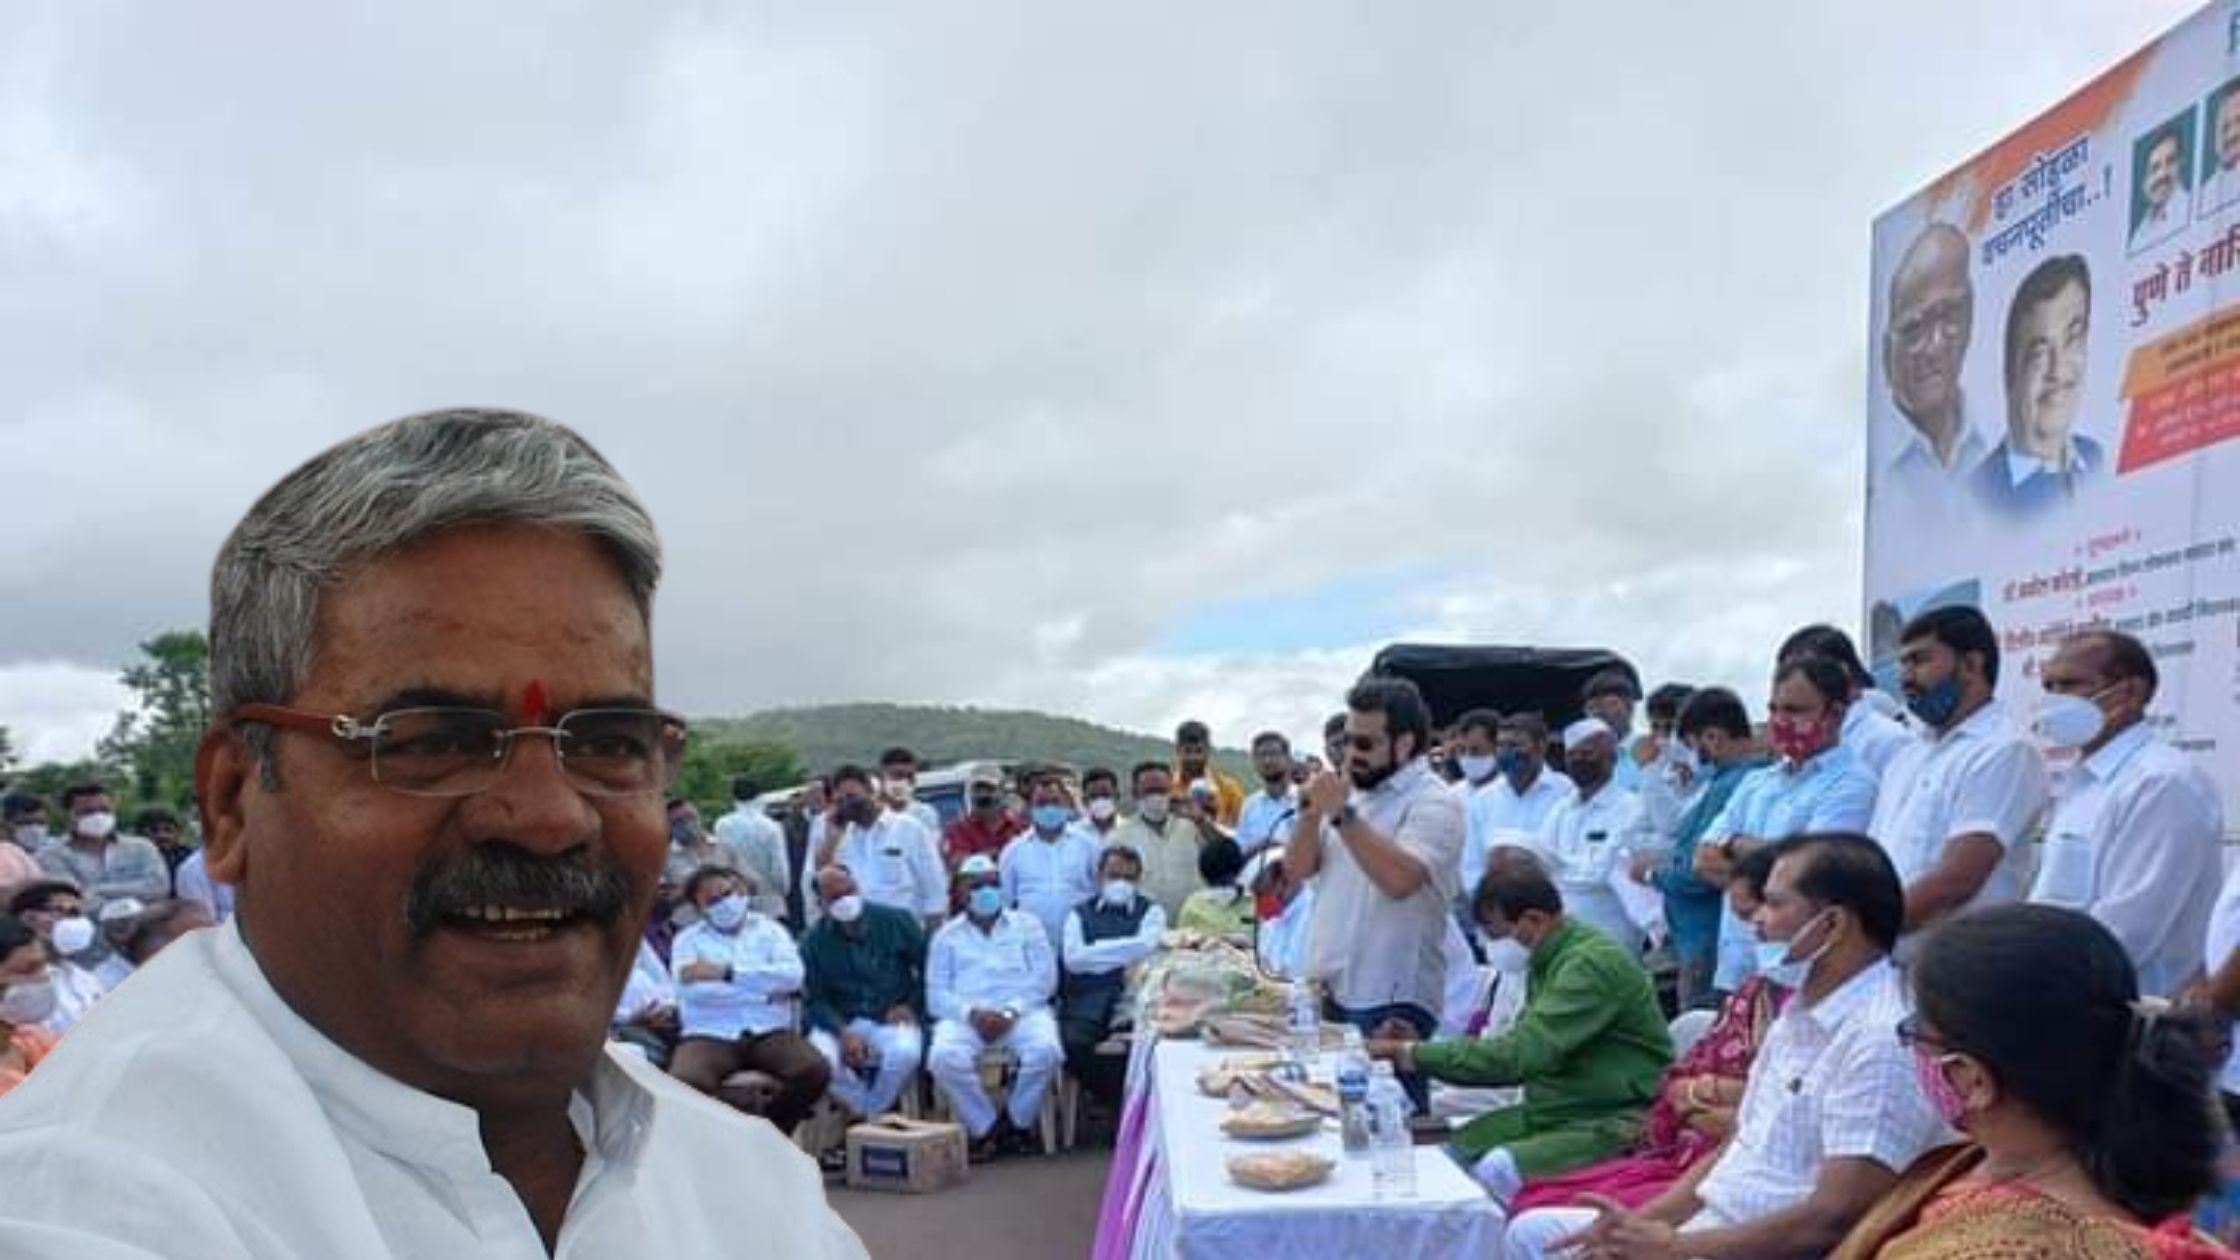 Amol Kolhe and Shivajirao Adhalrao Patil face off at the inauguration of Khed Ghat Bypass Road